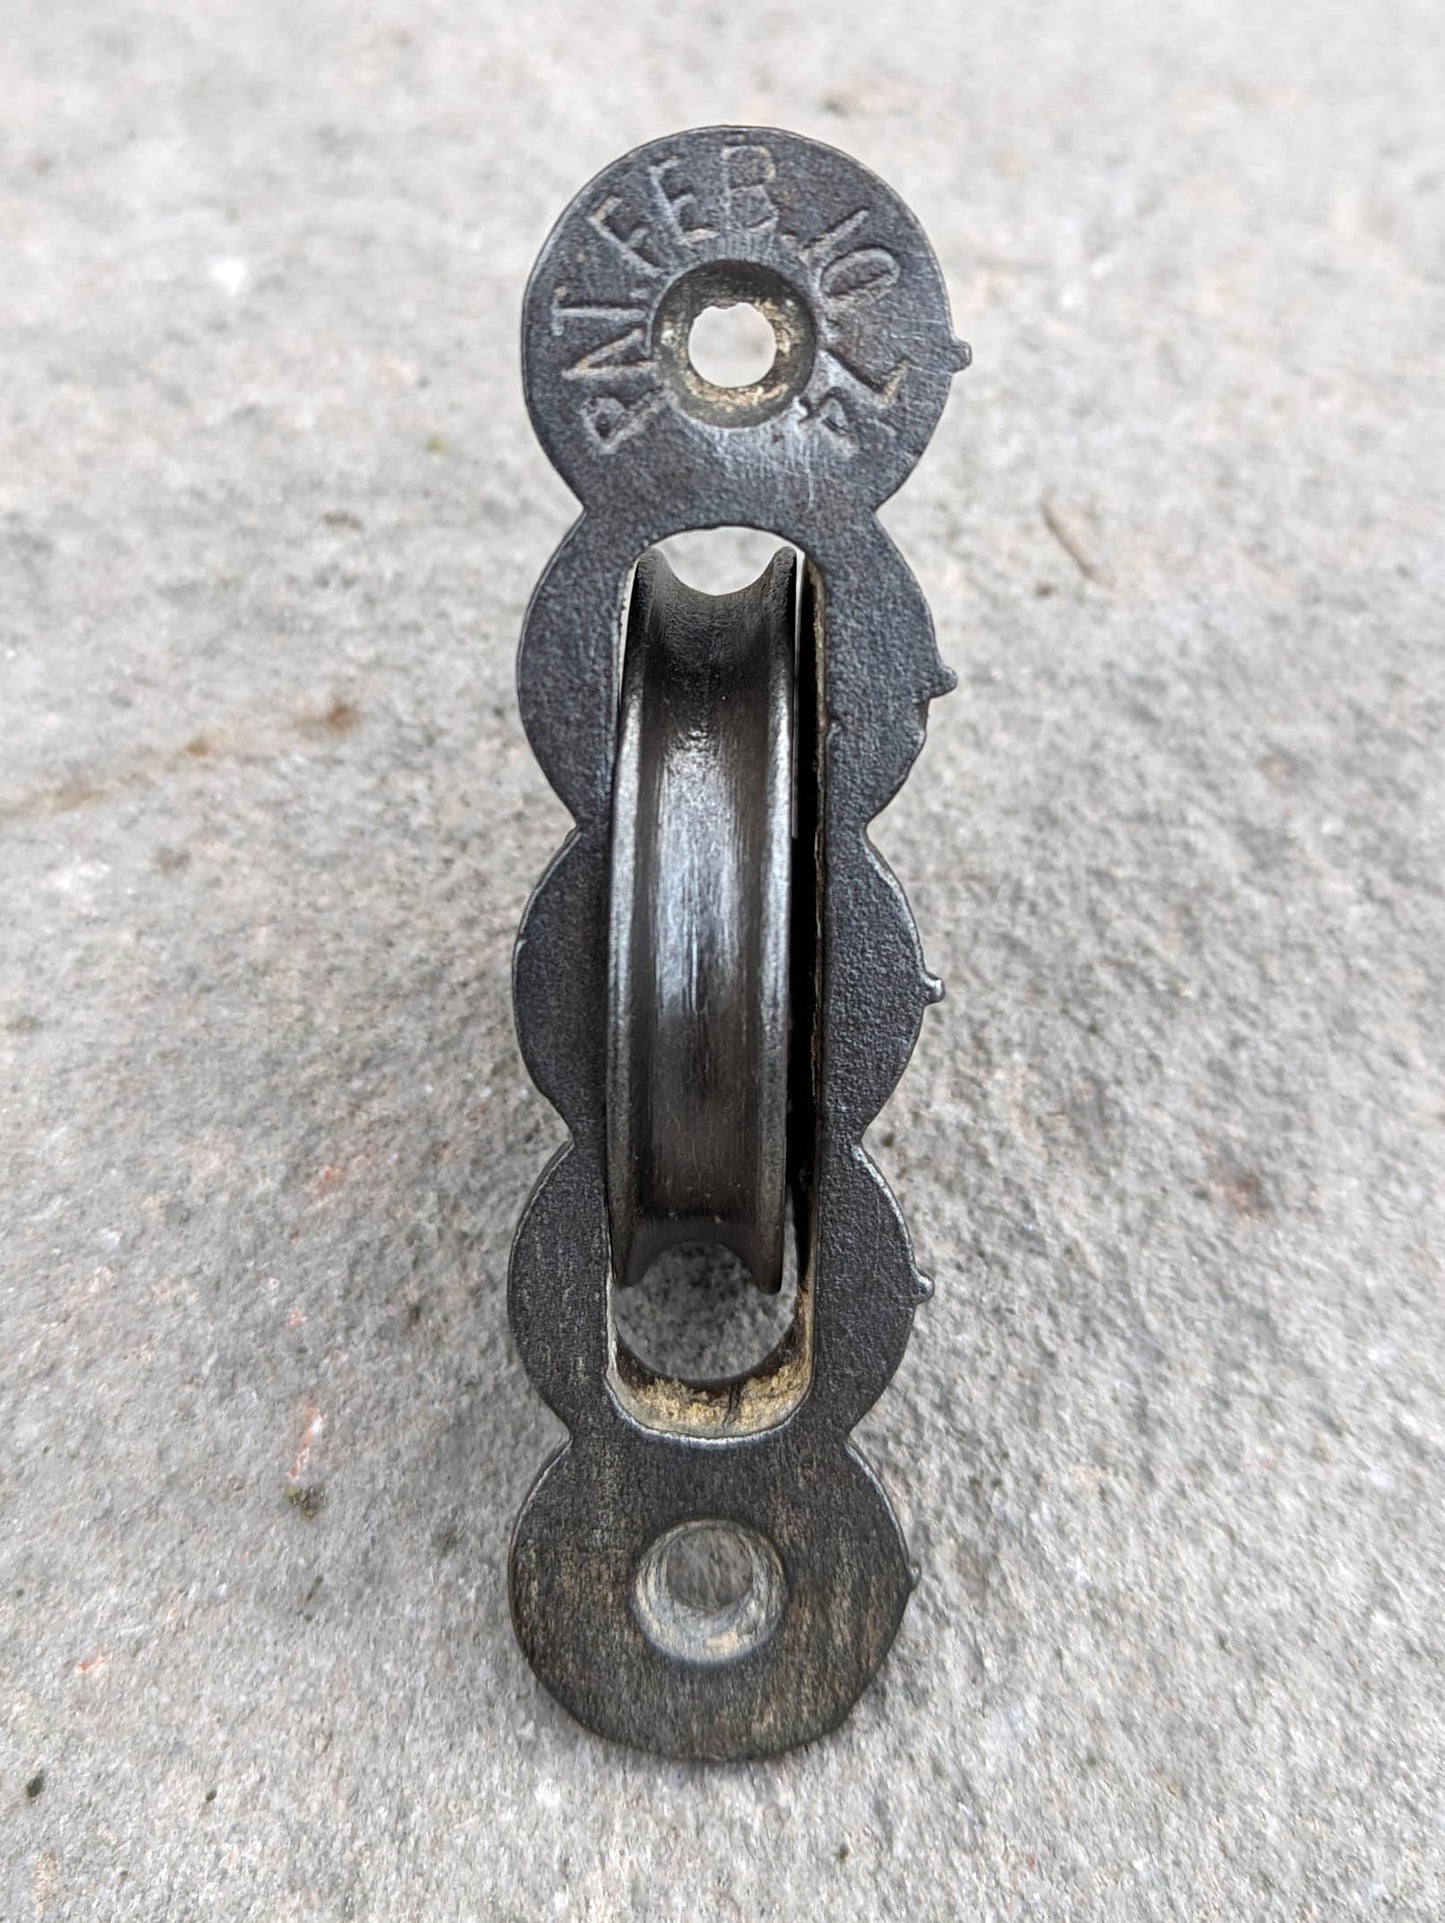 5 available Restored Cleaned Antique Vintage Old Reclaimed Salvaged Victorian Cast Iron Window Sash Pulleys Wheels Hardware